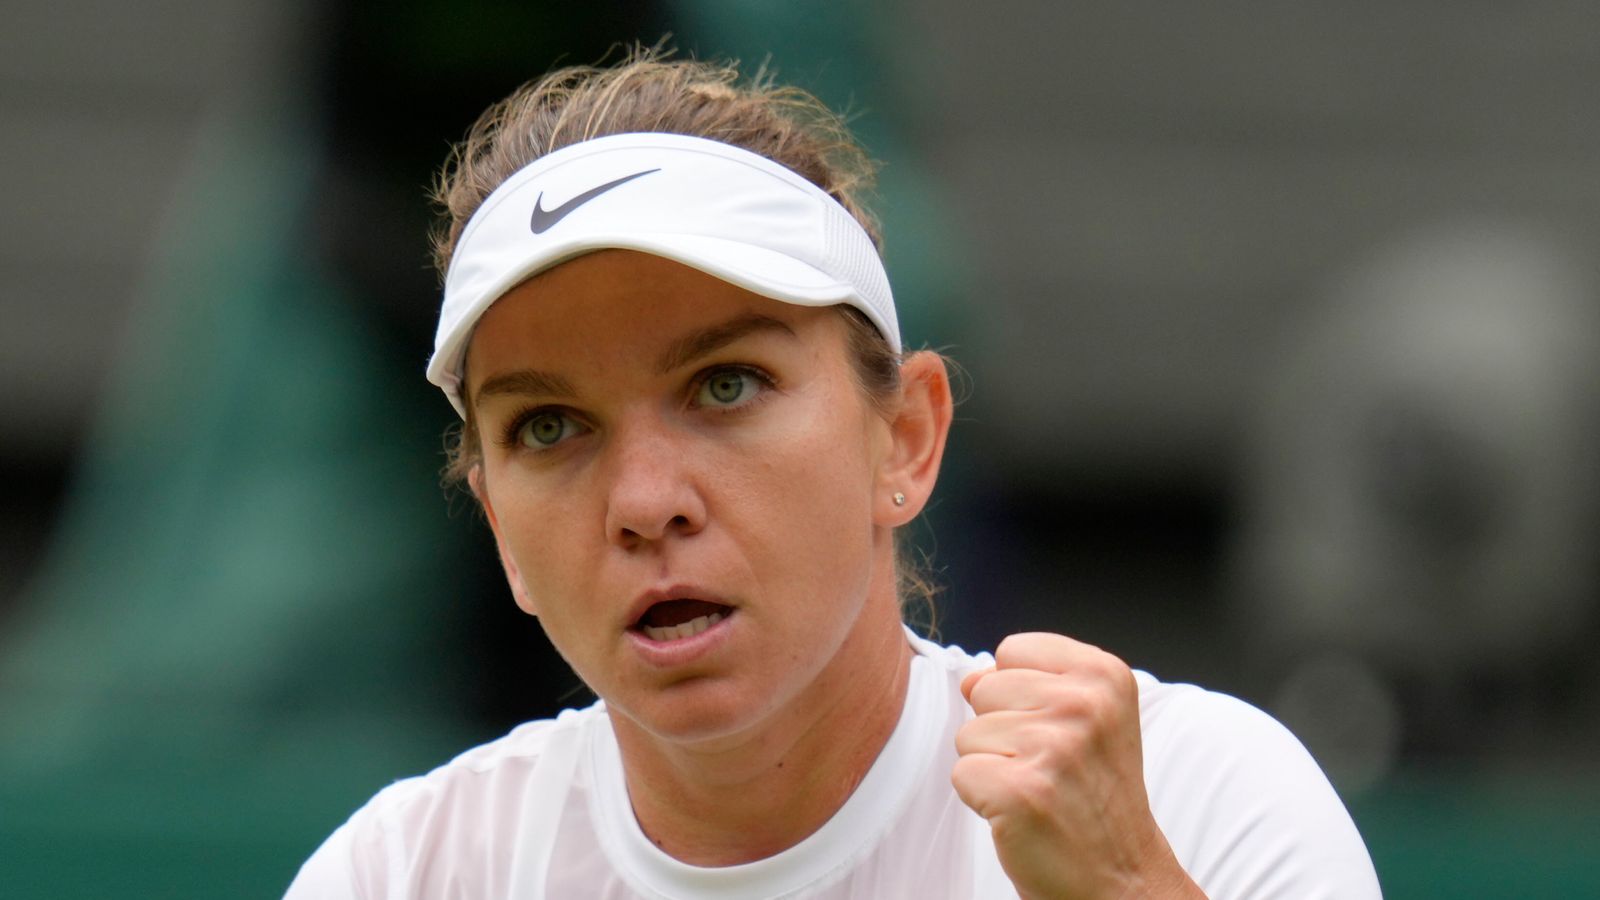 tennis star launches £8m claim against supplement supplier she blames for drugs ban